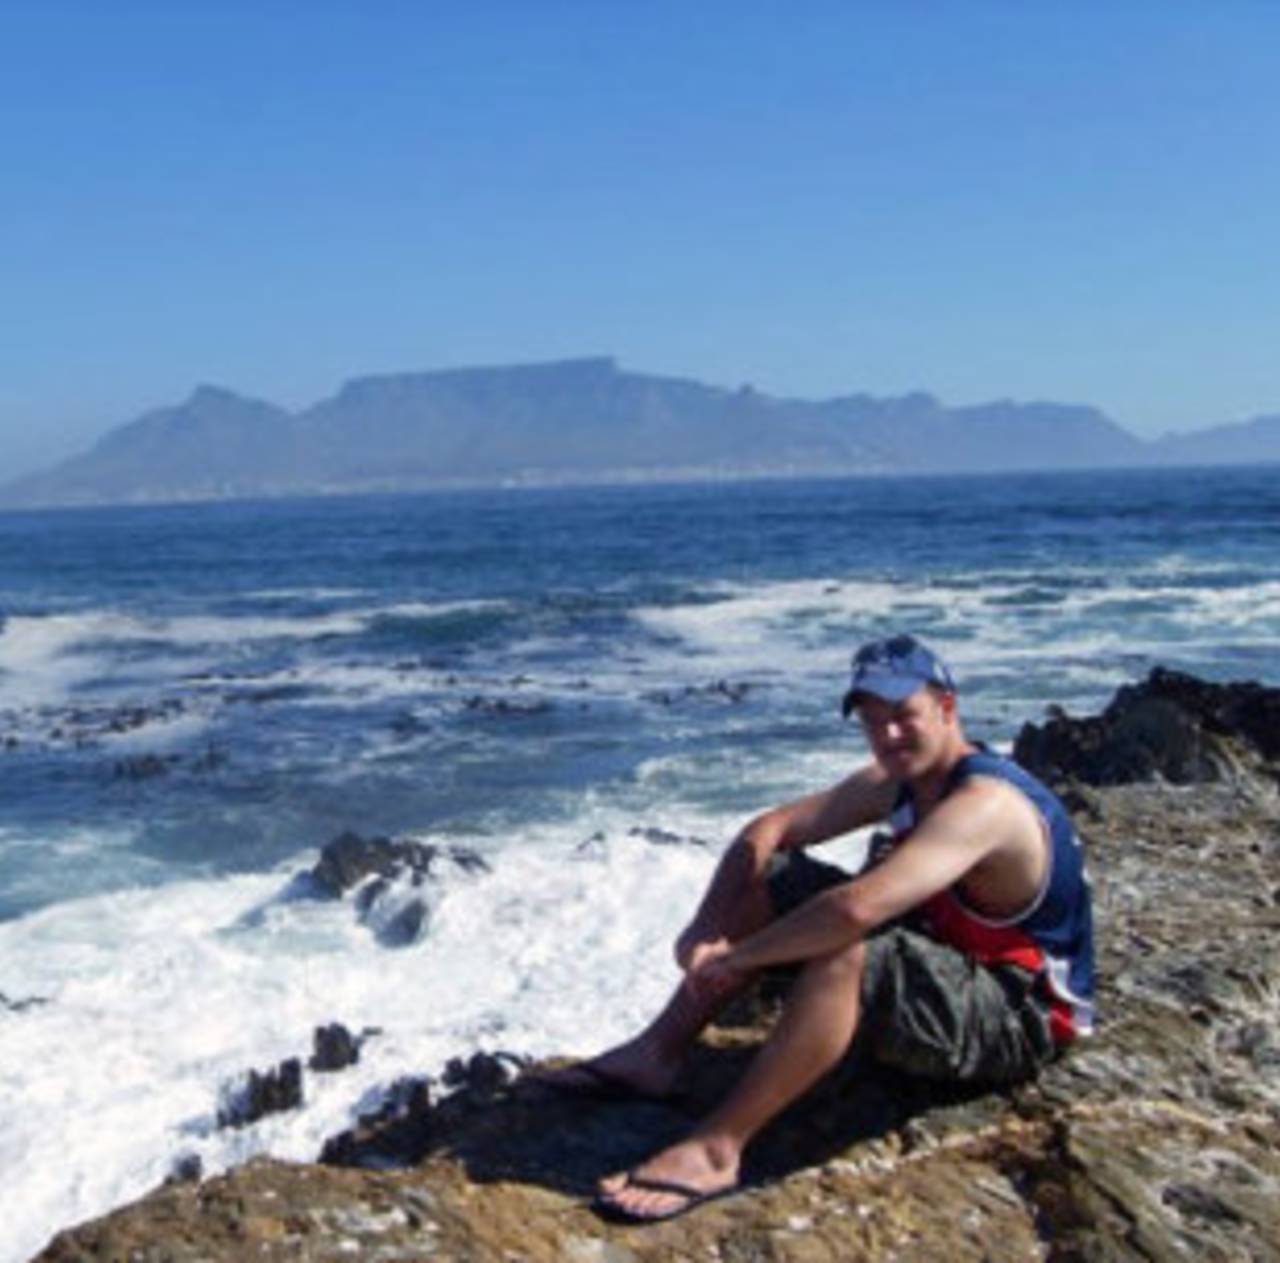 The author takes in the sights in Cape Town during an England tour to South Africa&nbsp;&nbsp;&bull;&nbsp;&nbsp;Richard Kemp